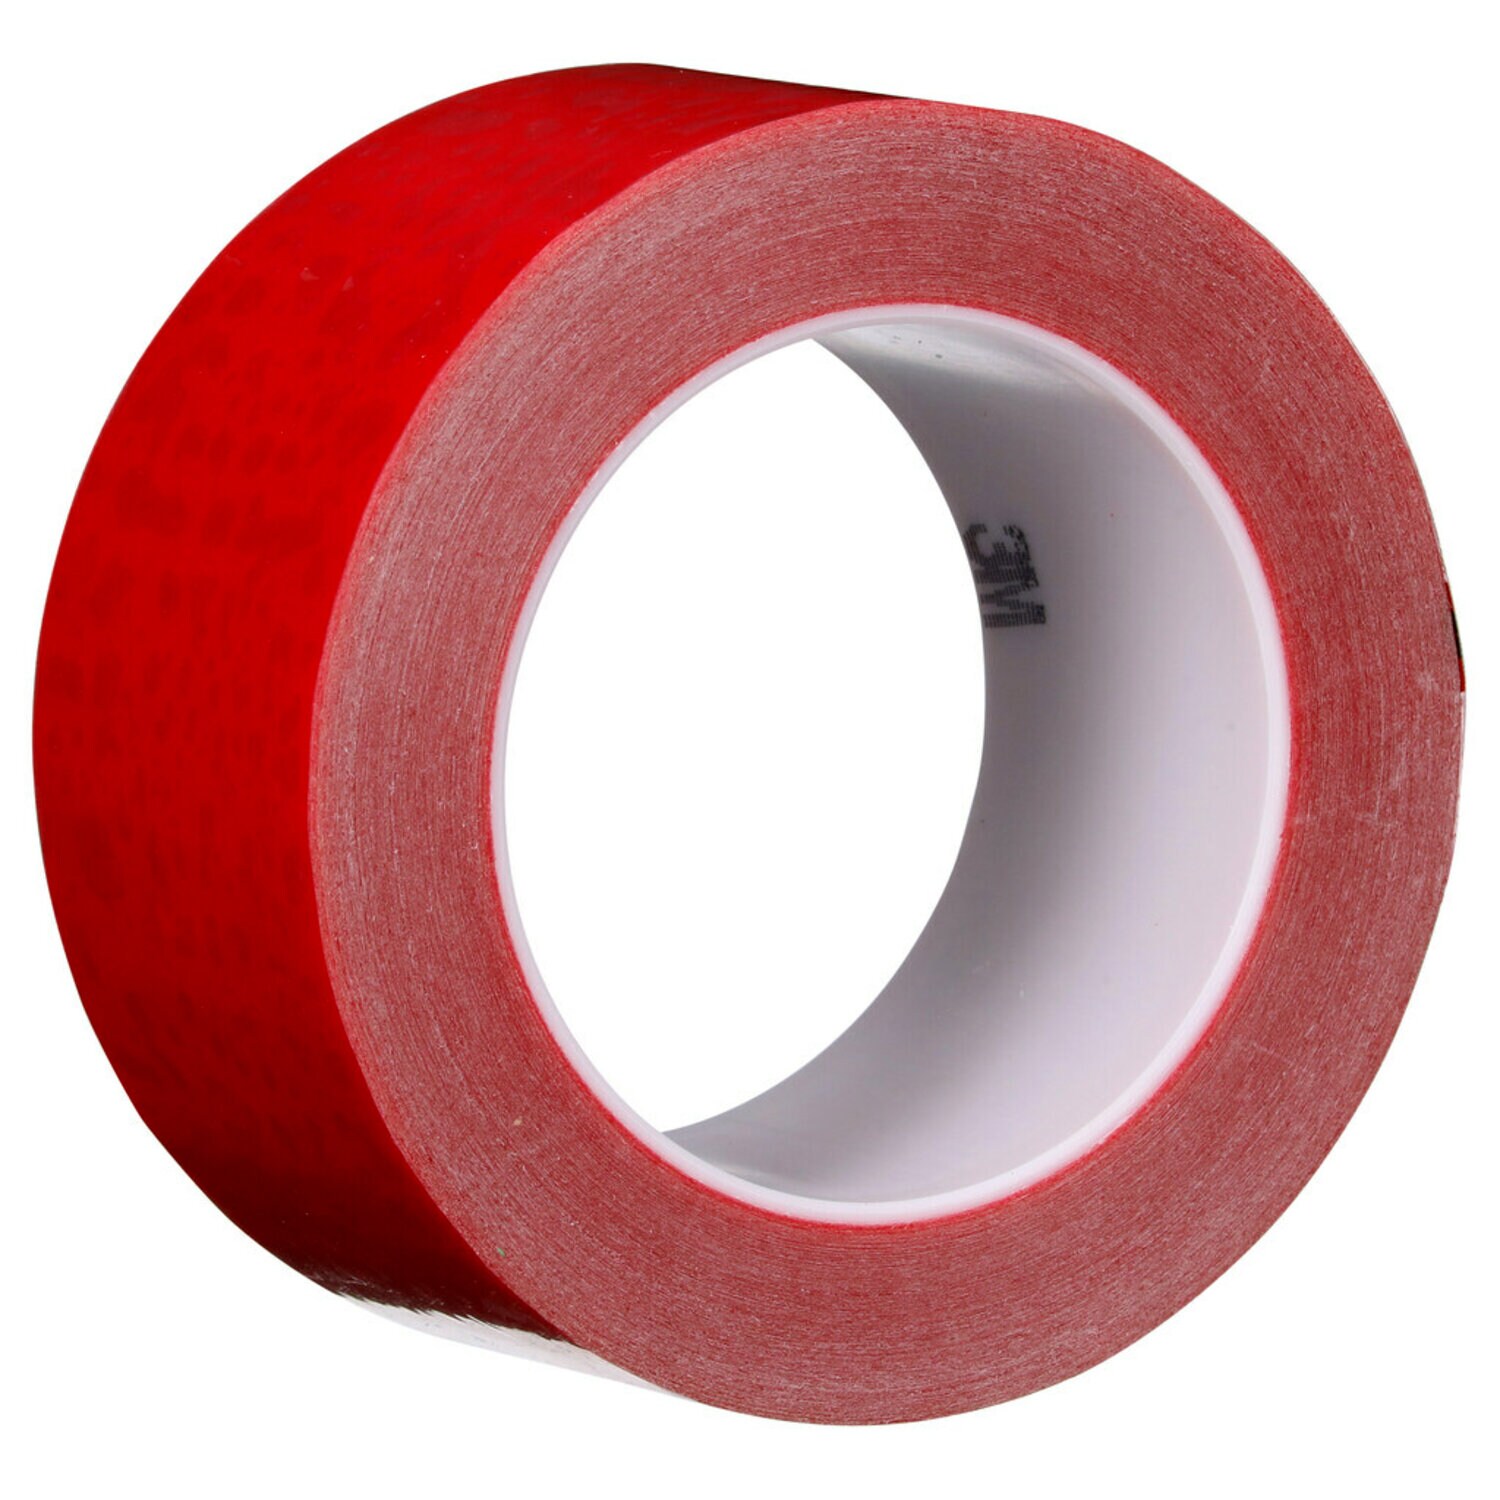 7000048790 - 3M Polyester Protective Tape 335, Pink, 2 in x 144 yd, 1.6 mil, 6 rolls
per case